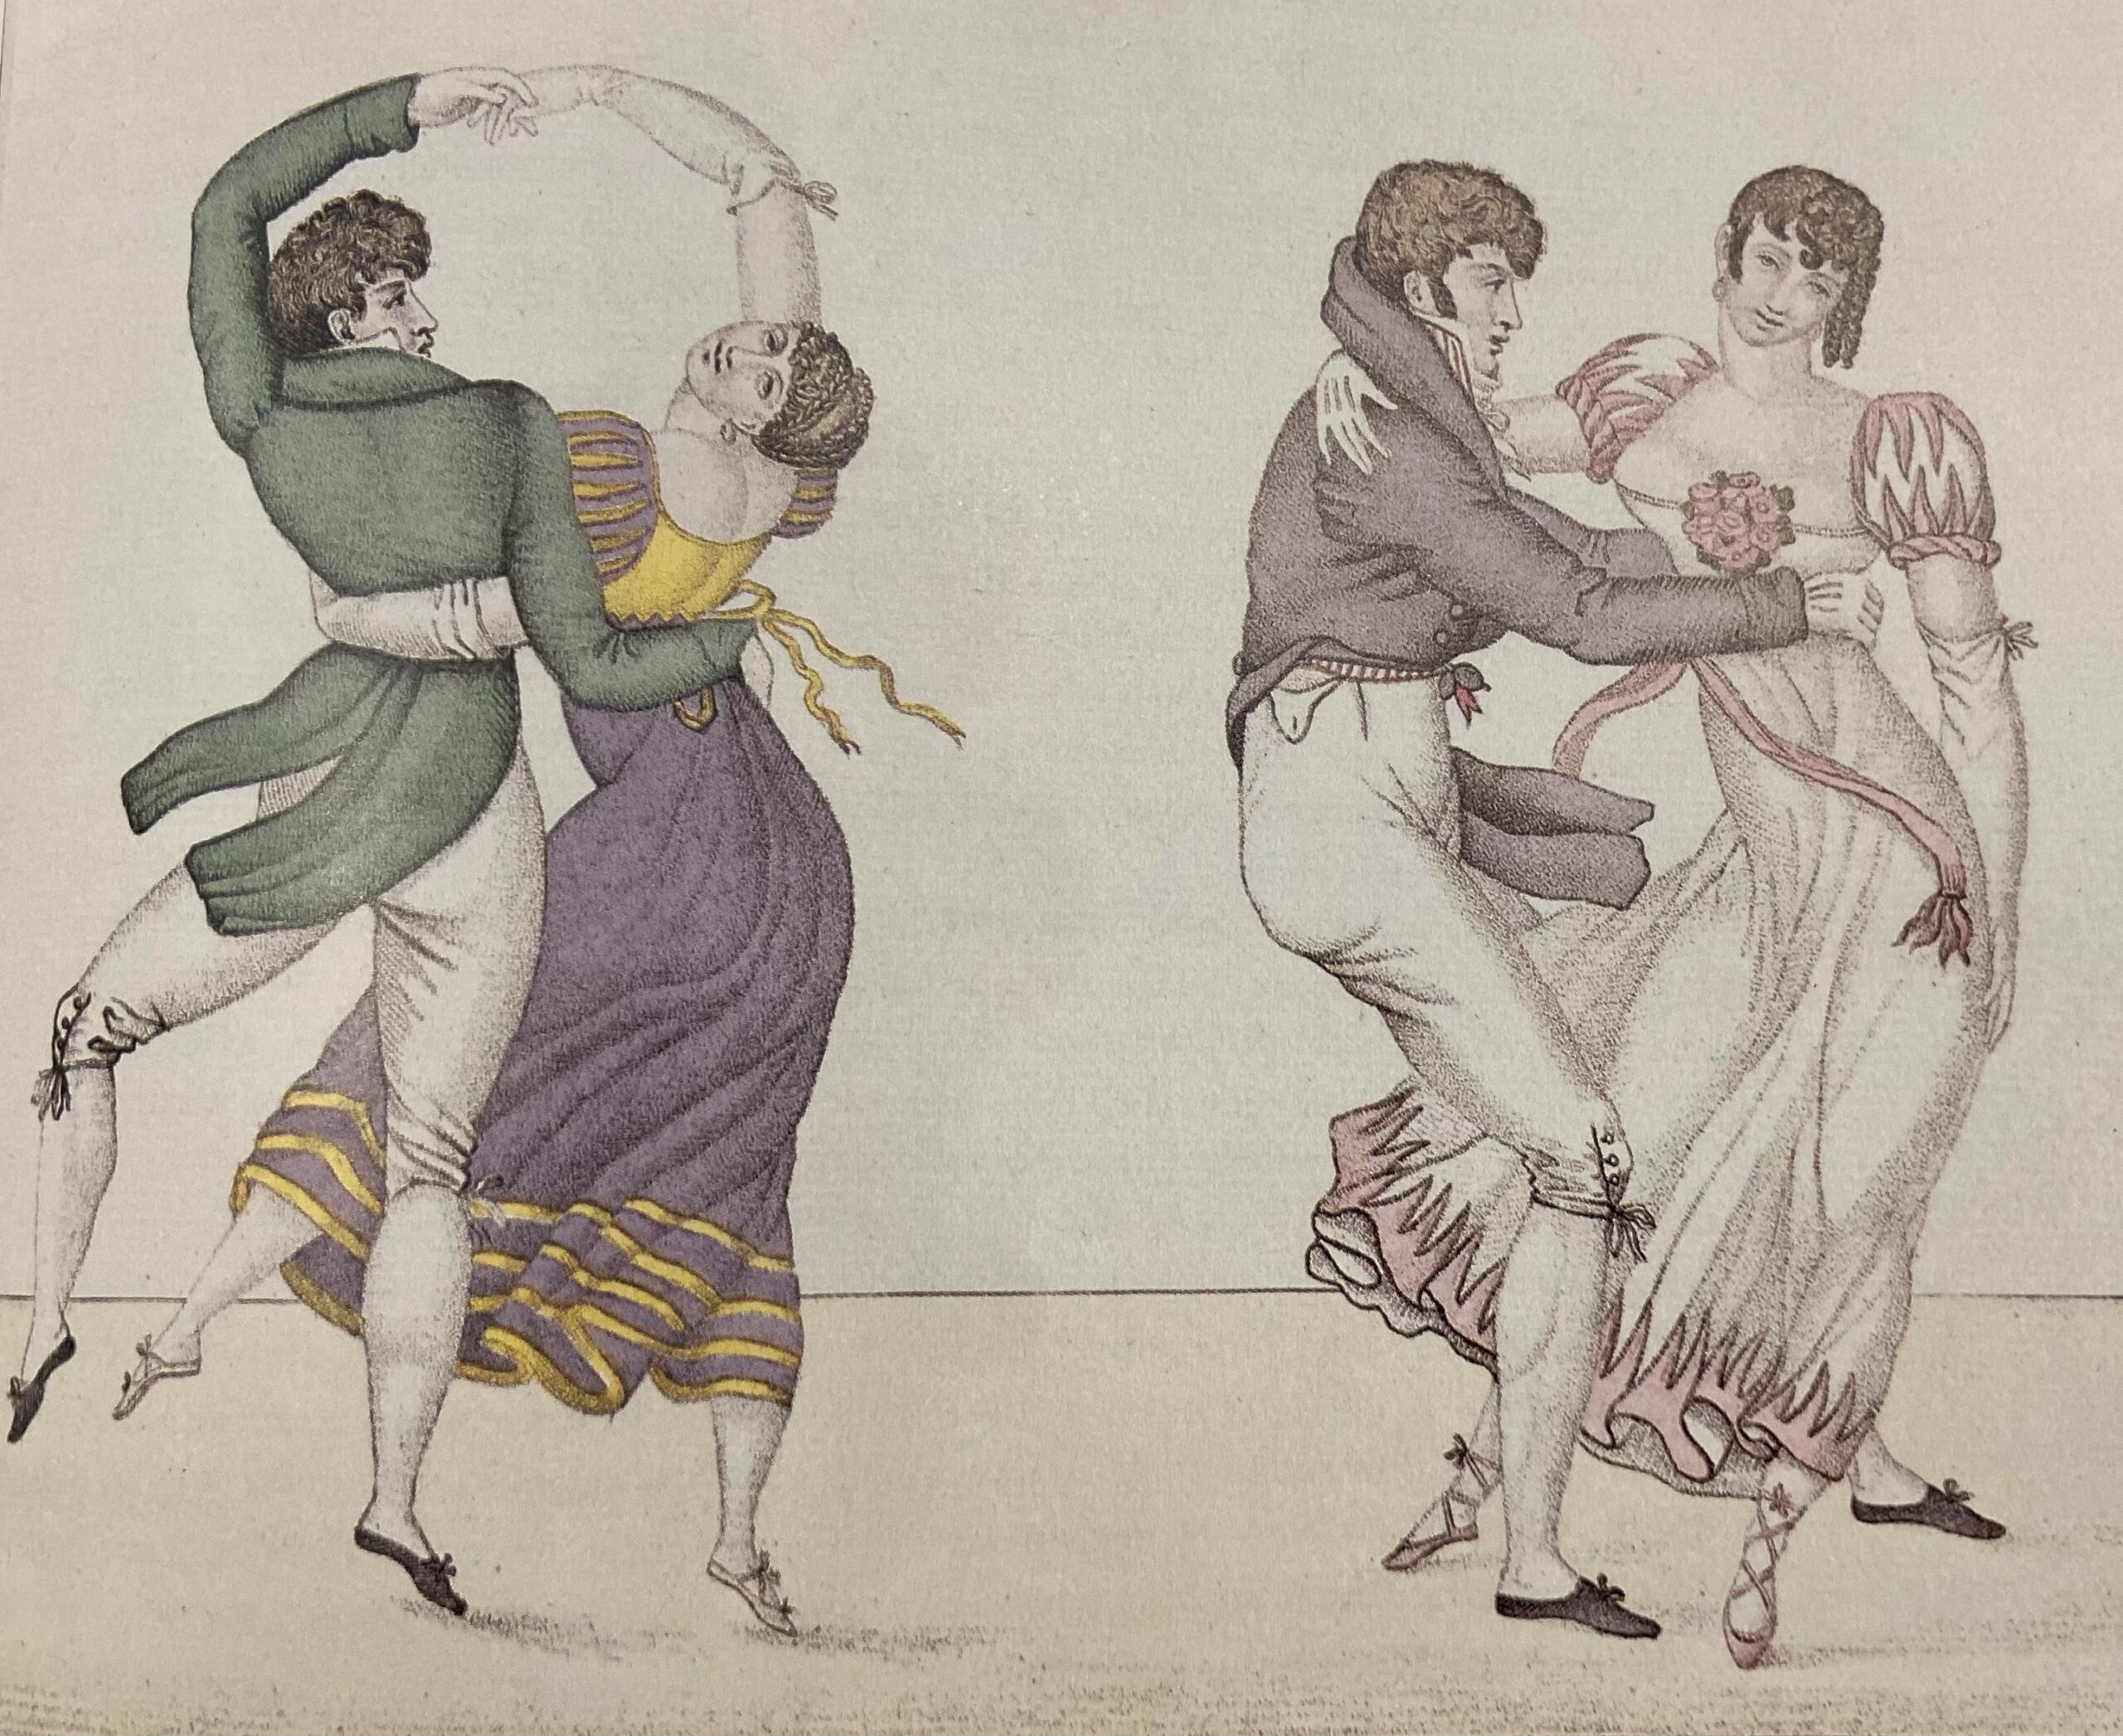 The Evolution of Social Dancing: Part 1